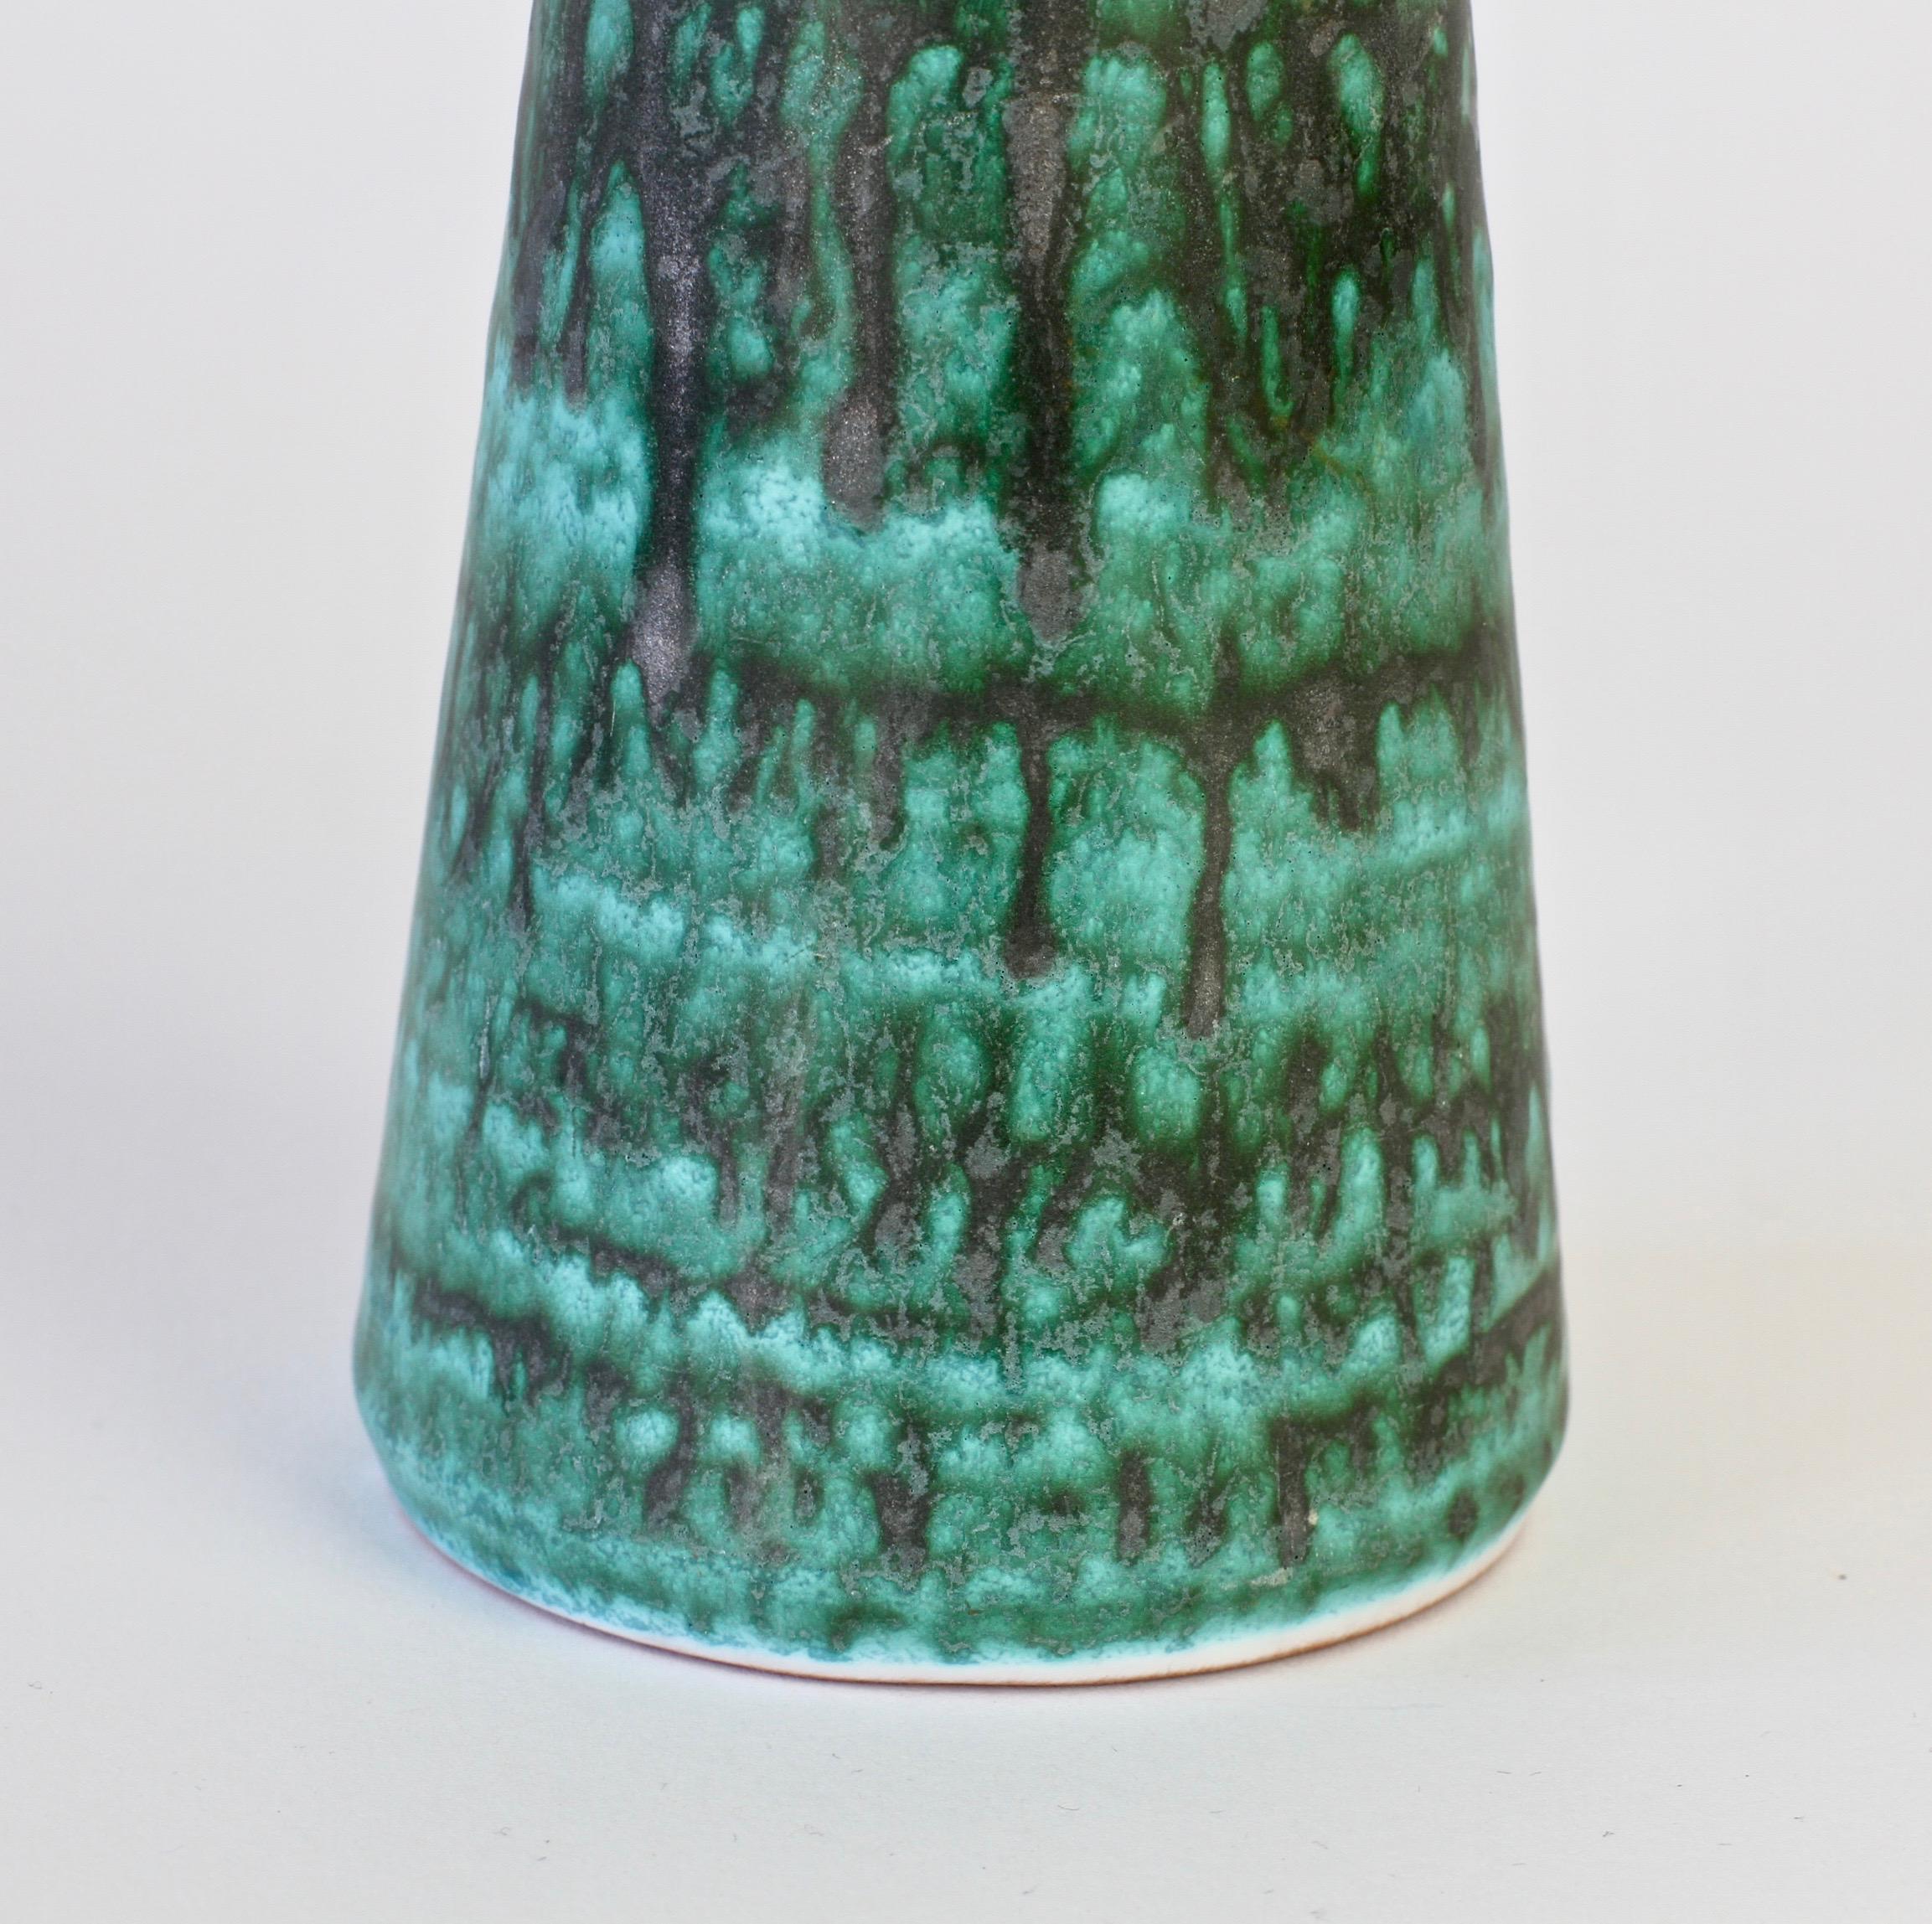 Vintage Midcentury Green and Graphite Glazed Vase by Waechtersbach, 1950s For Sale 1